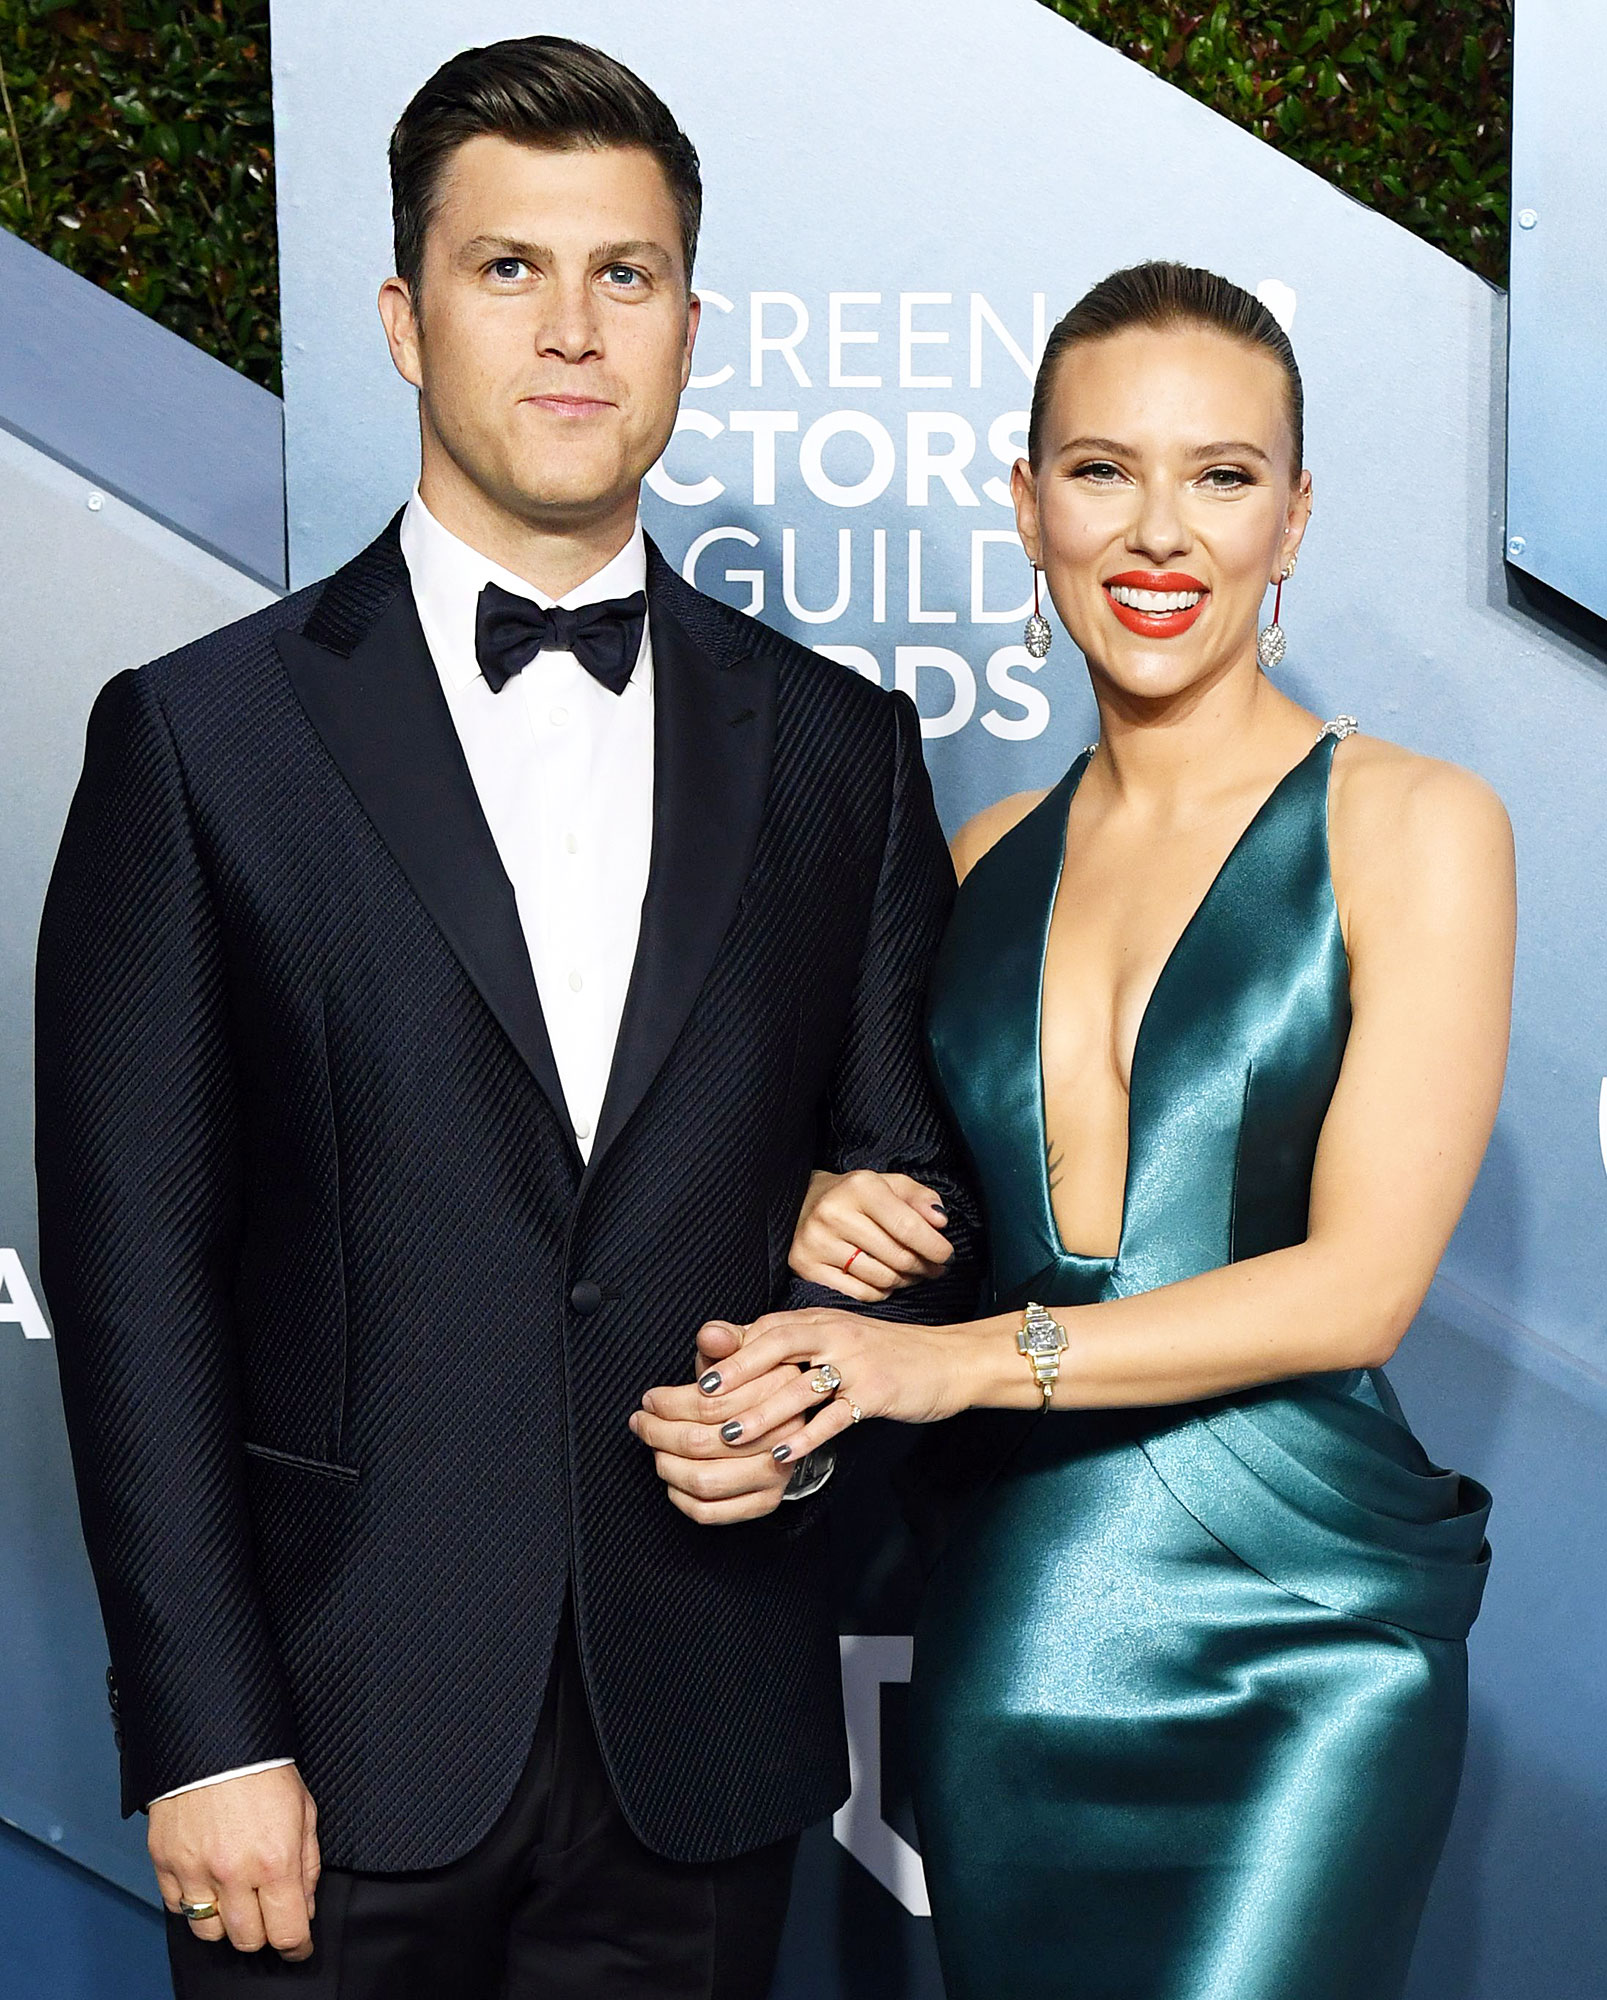 Colin Jost and Scarlett Johansson attend the SAGs 2020 Colin Jost Returns to Saturday Night Live After Wedding to Scarlett Johansson